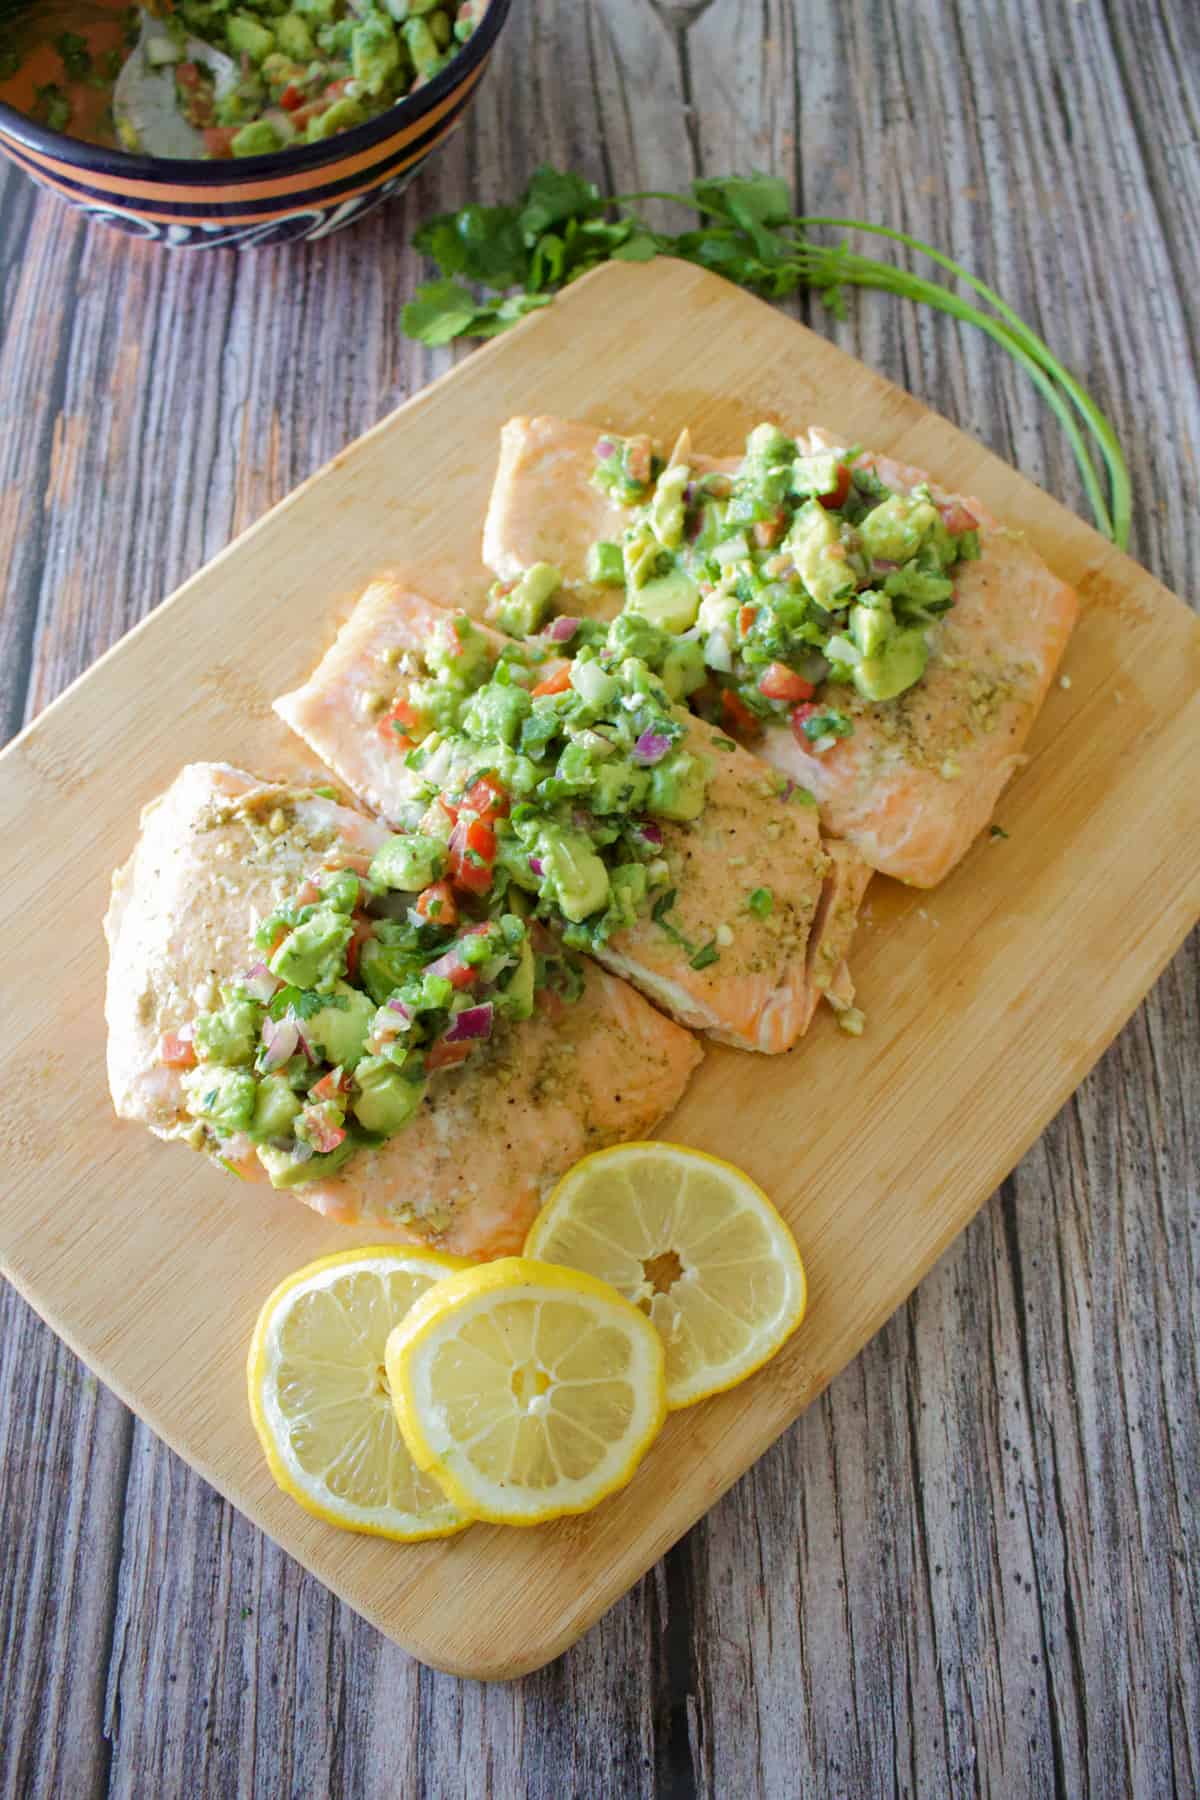 Baked salmon on a wooden cutting board topped with avocado pico de gallo.